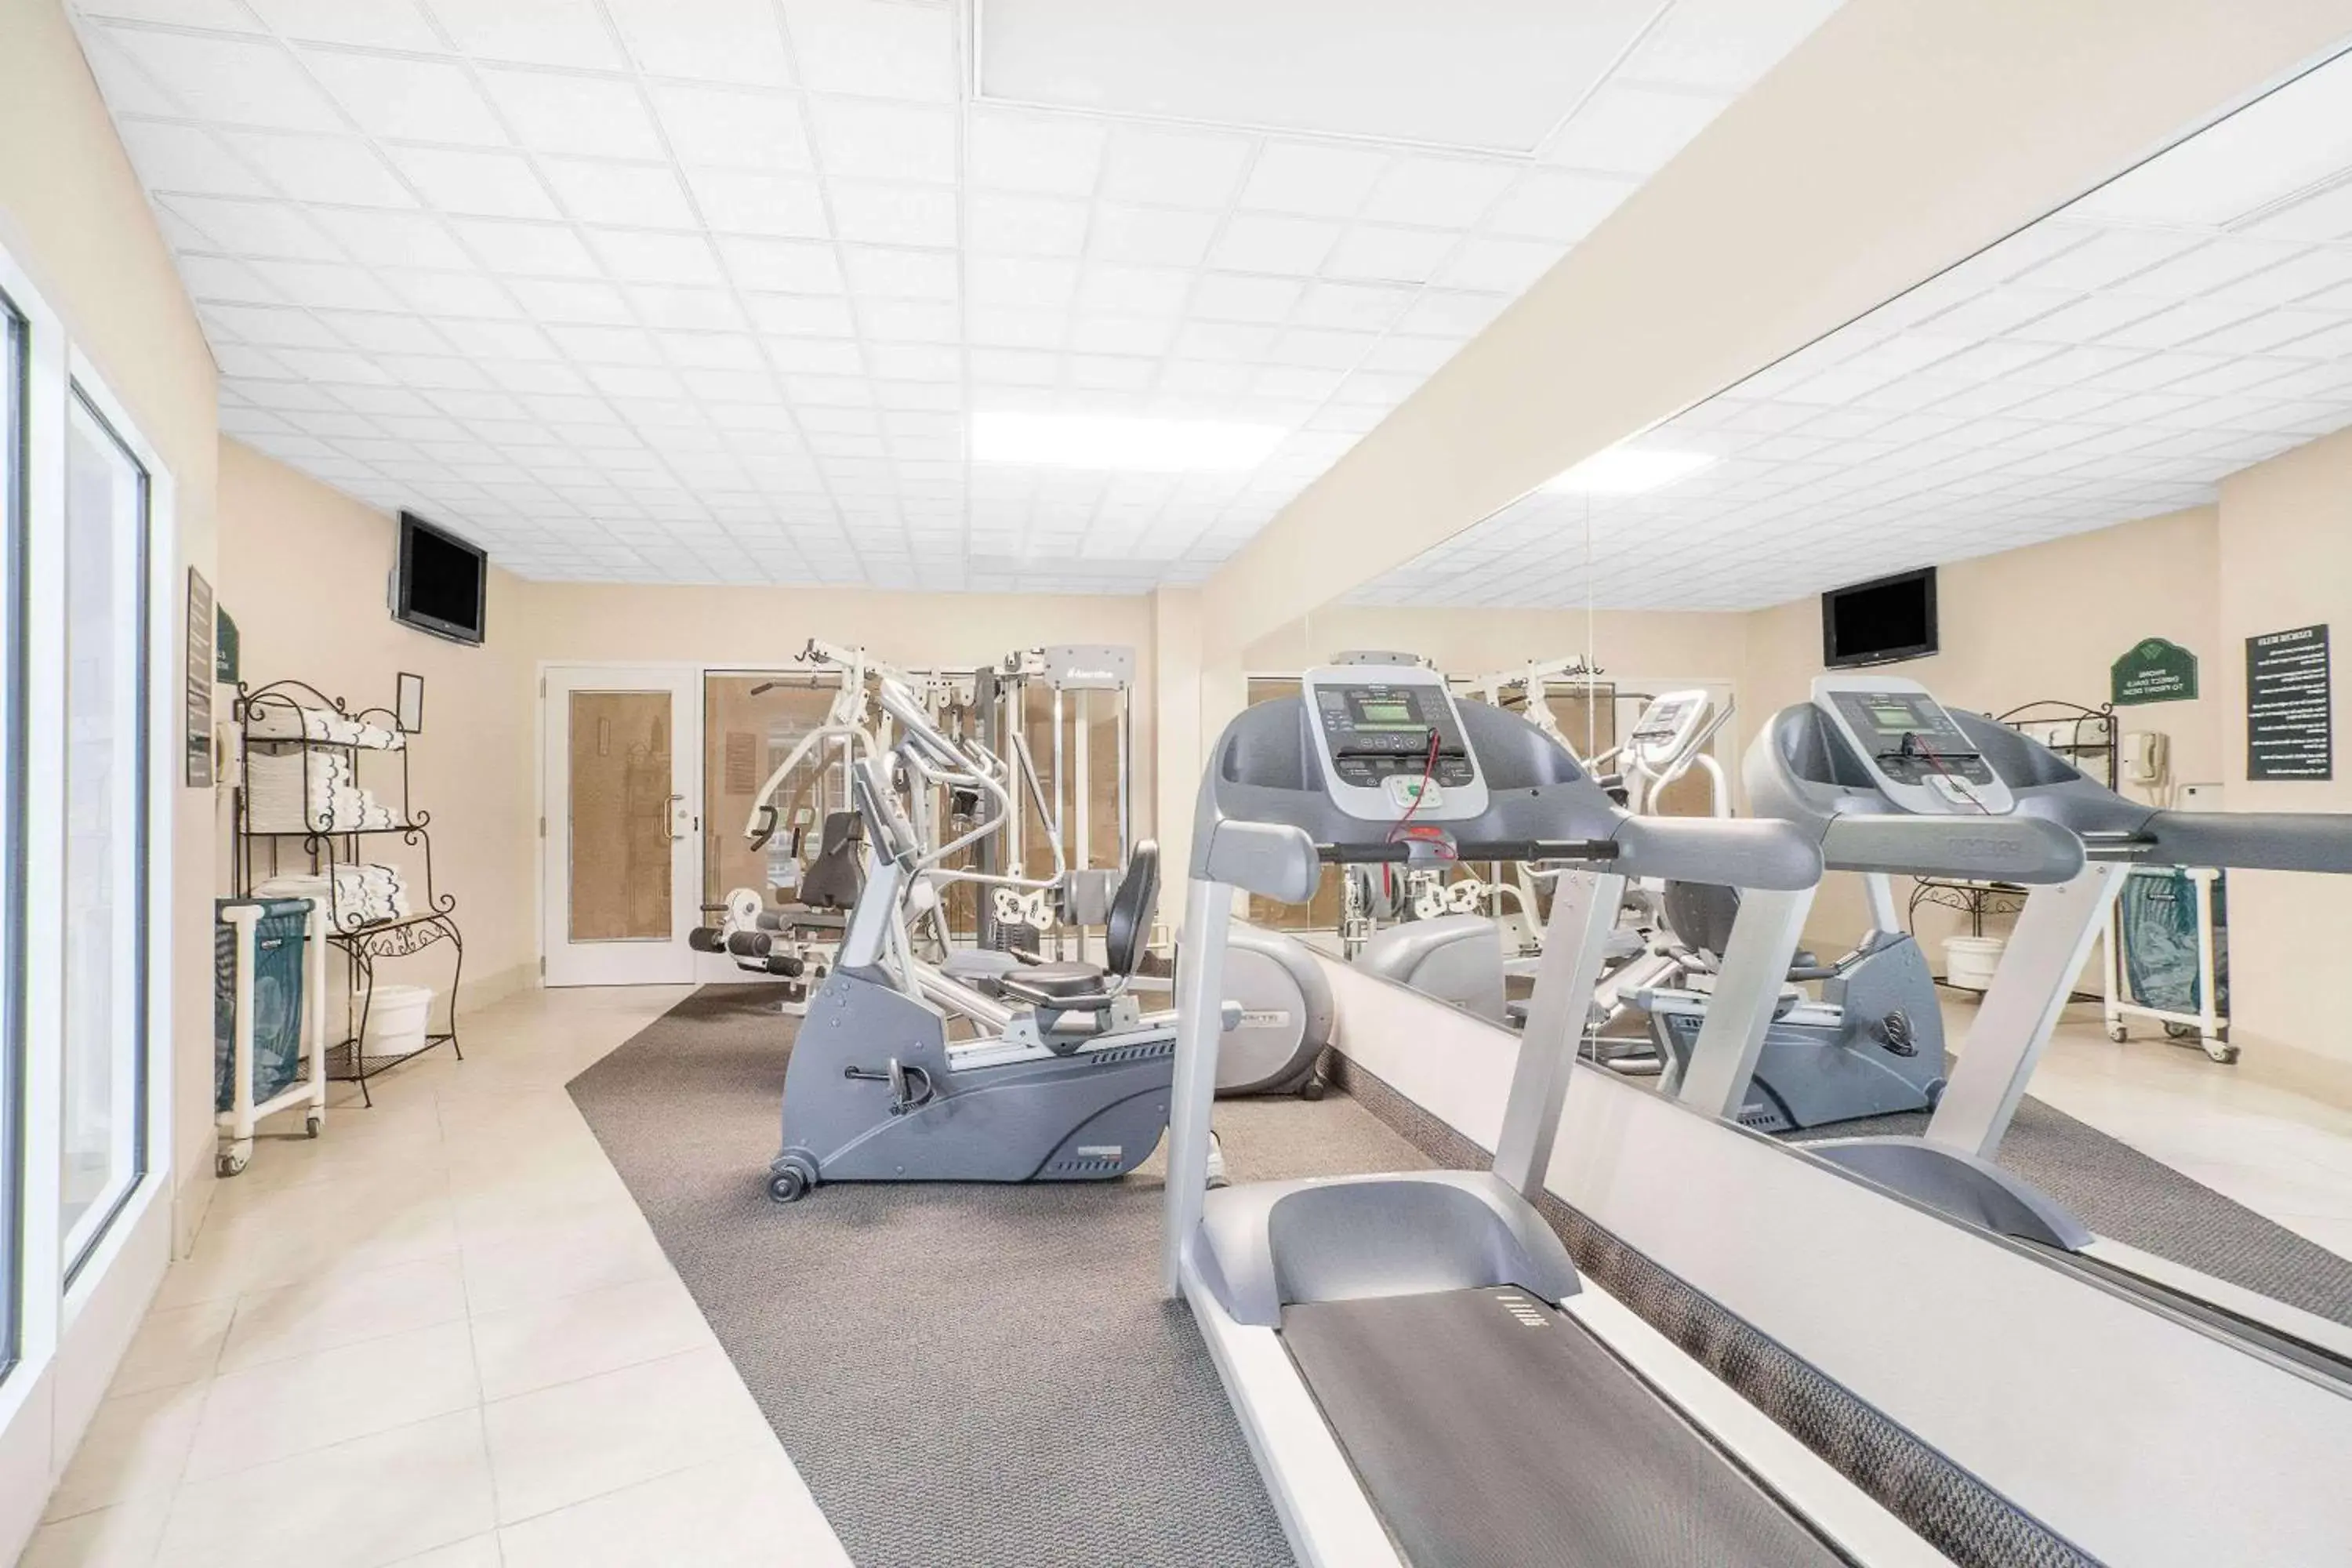 Fitness centre/facilities, Fitness Center/Facilities in Wingate by Wyndham Ellicottville